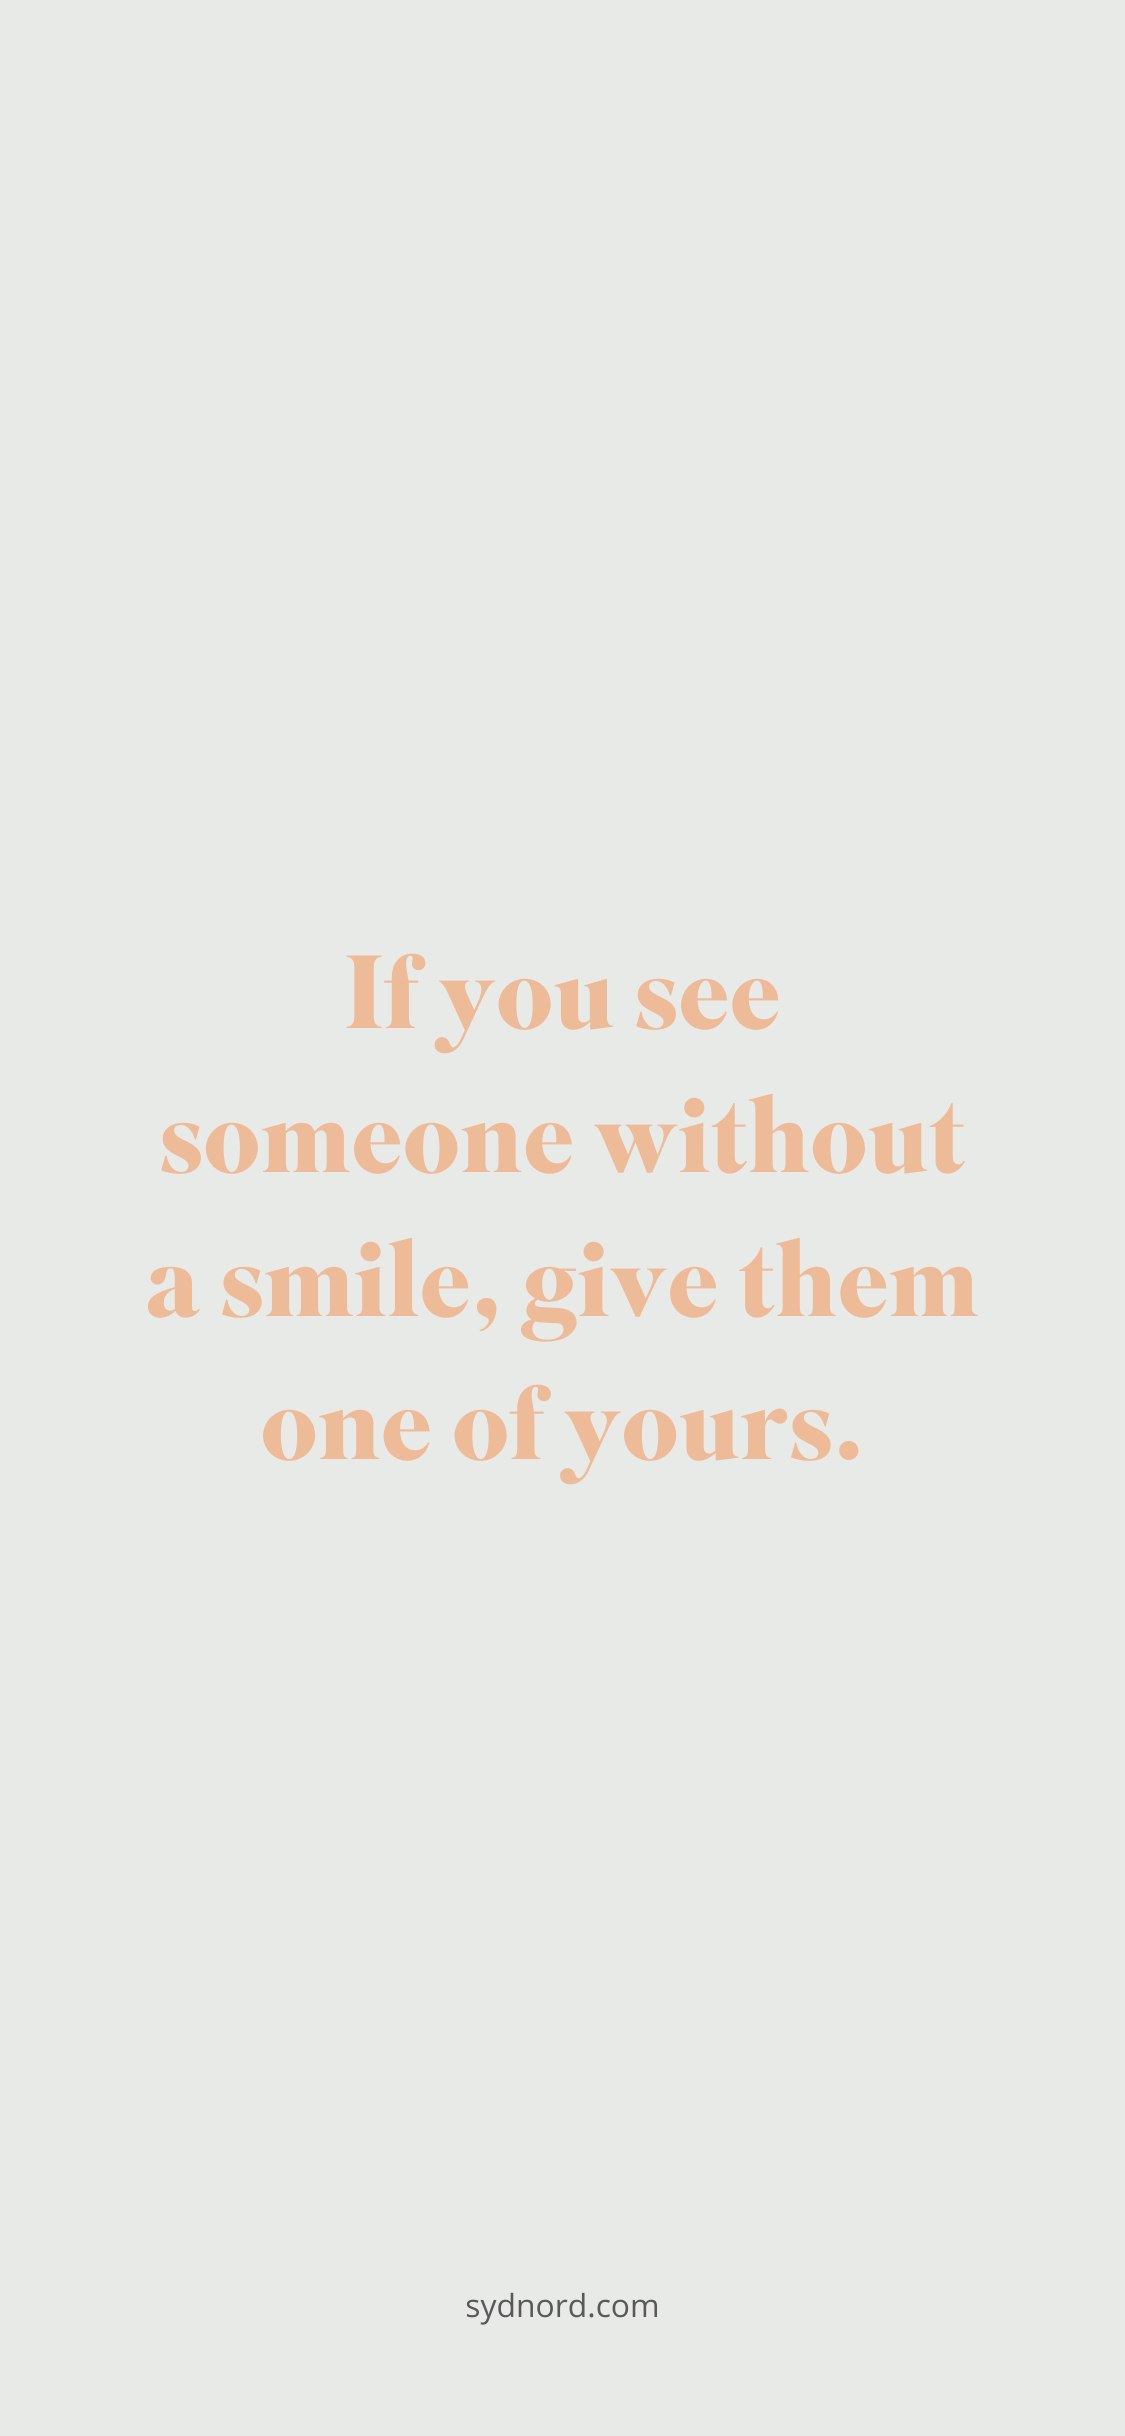 Positive quotes: If you see someone without a smile, give them one of yours.